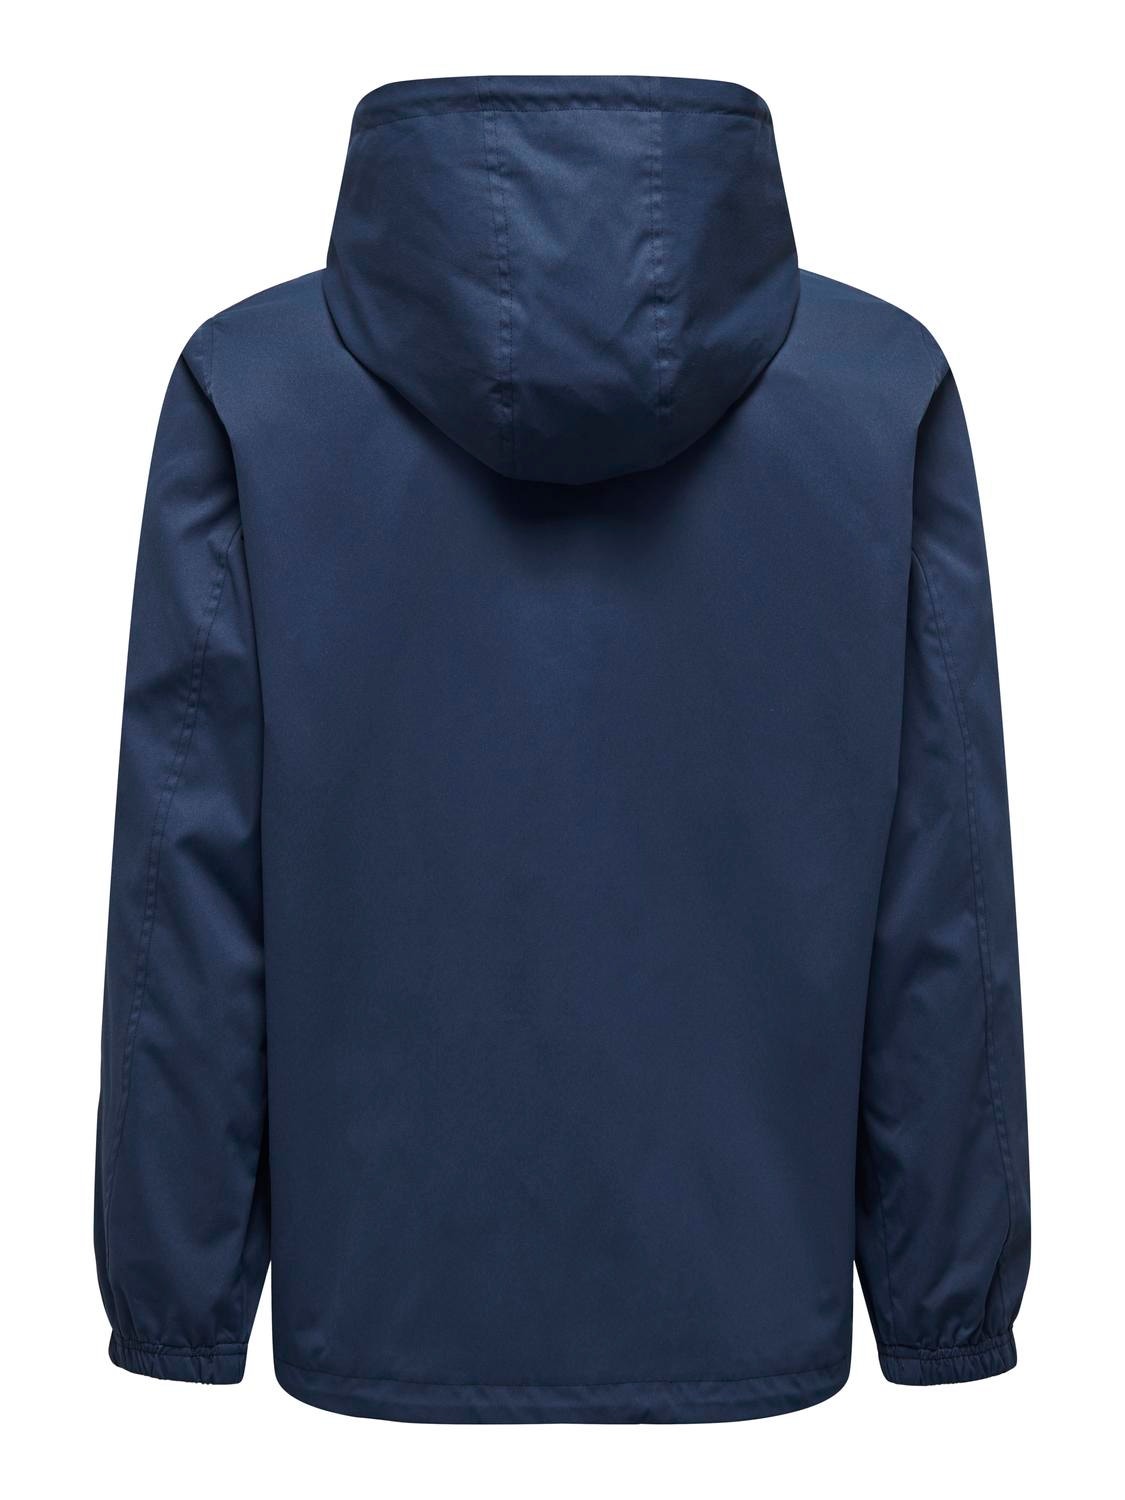 ONLY & SONS Hood with string regulation Jacket -Naval Academy - 22027439